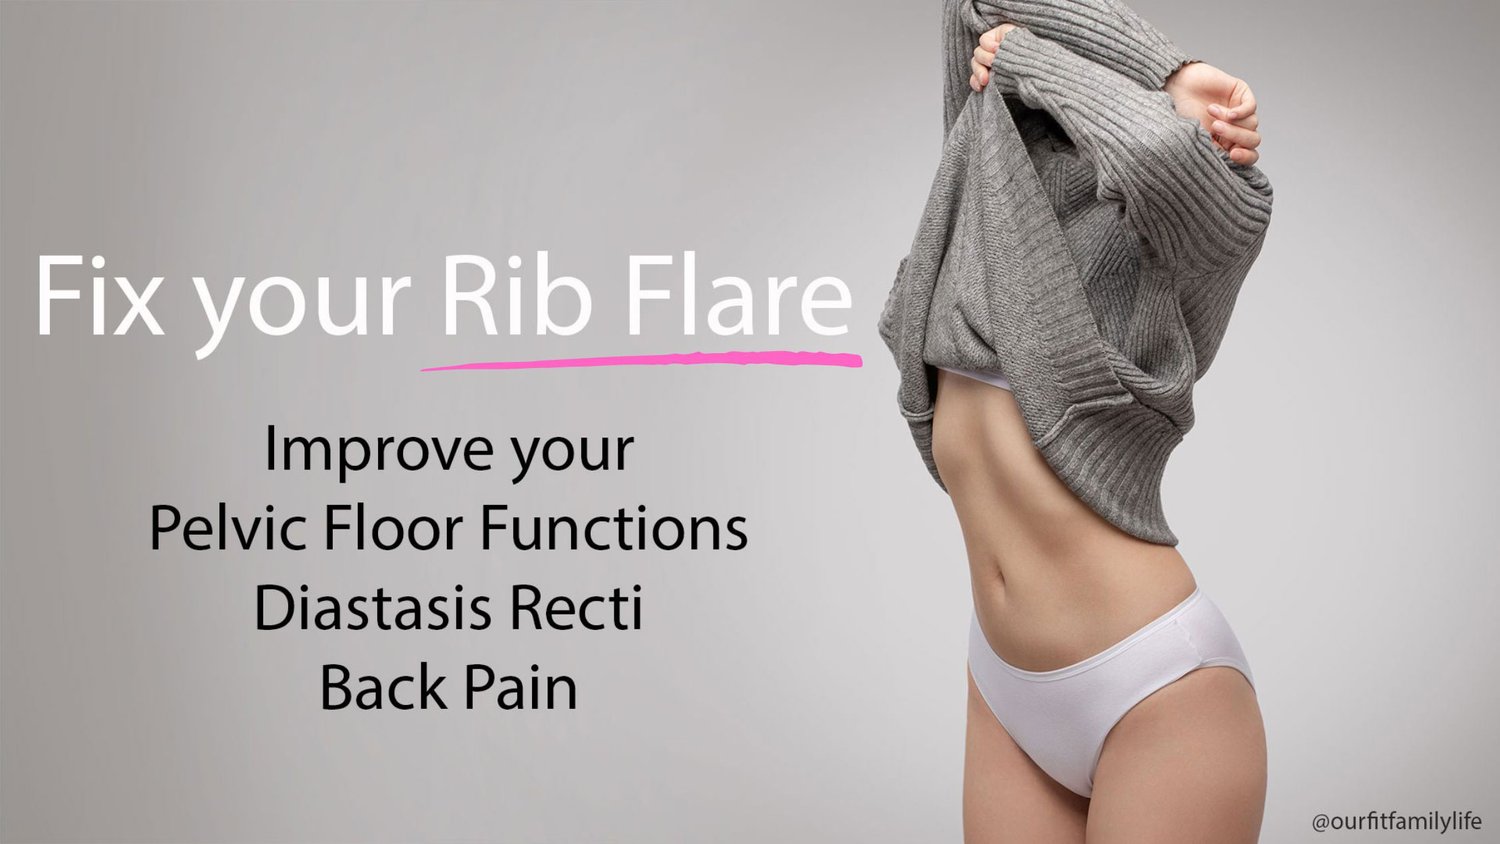 Fix Rib Flare In 1 Exercise (fast results) 